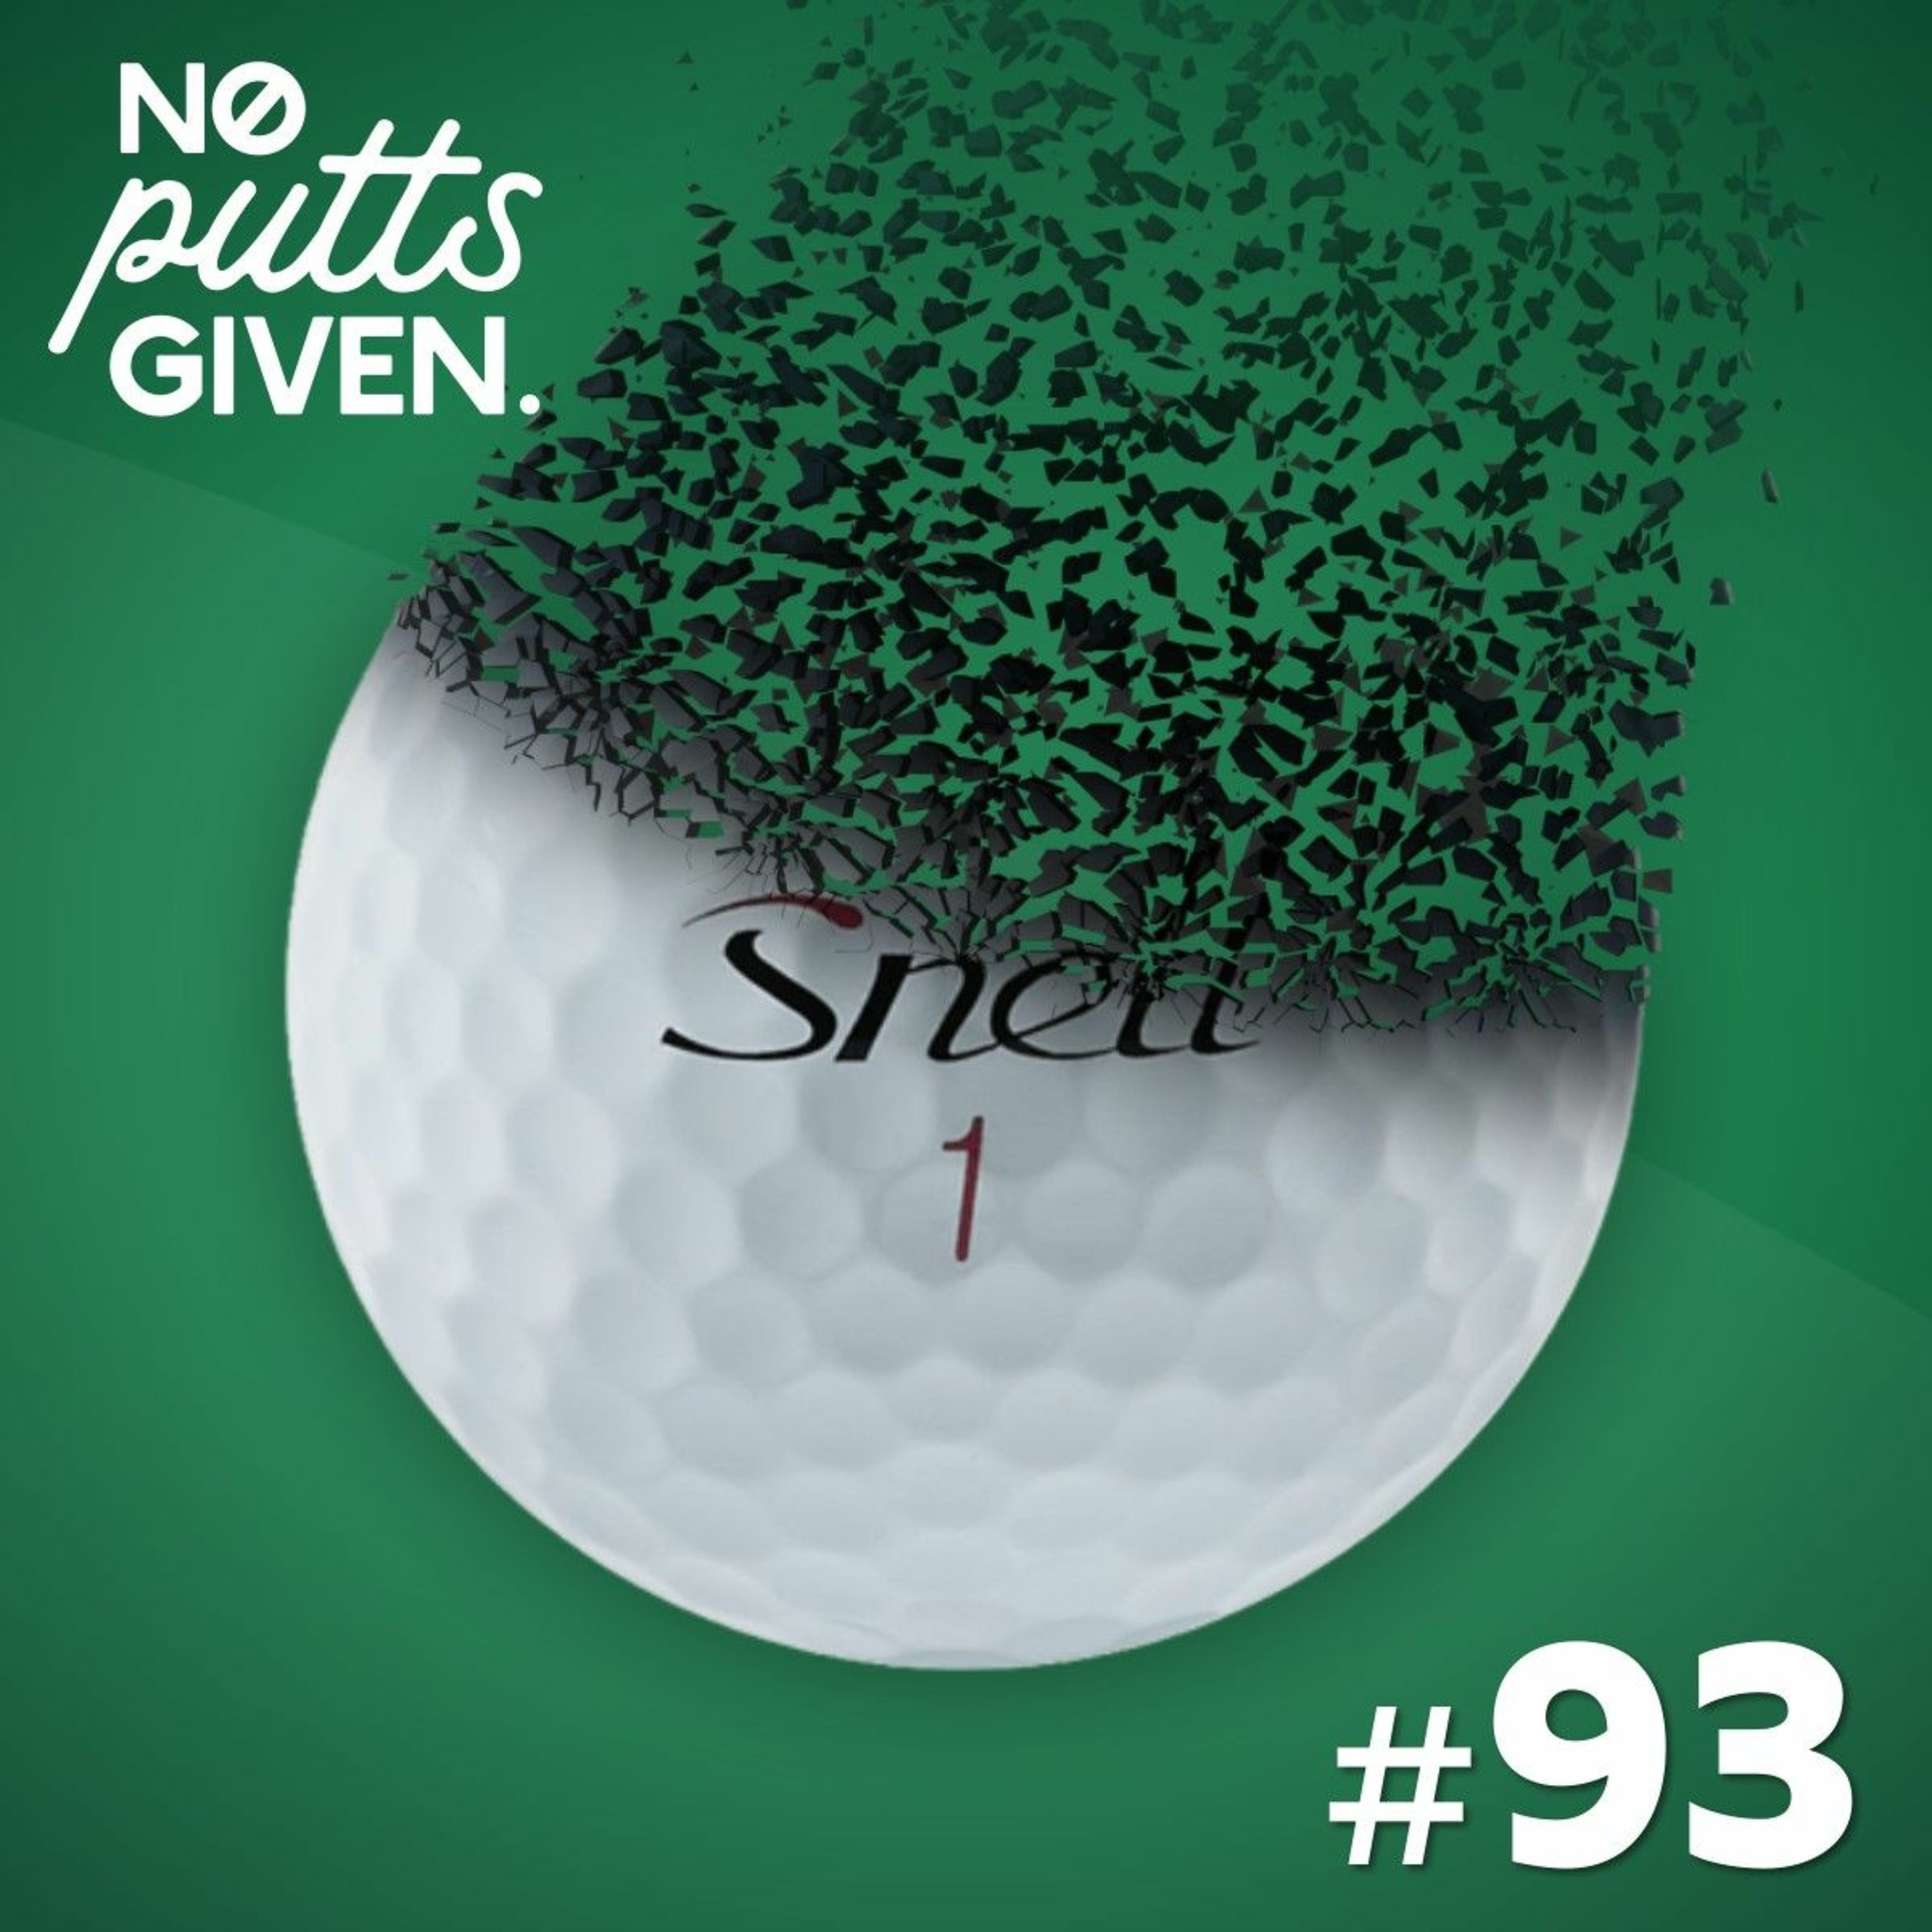 Are We Running Out of Golf Balls? | NPG 93